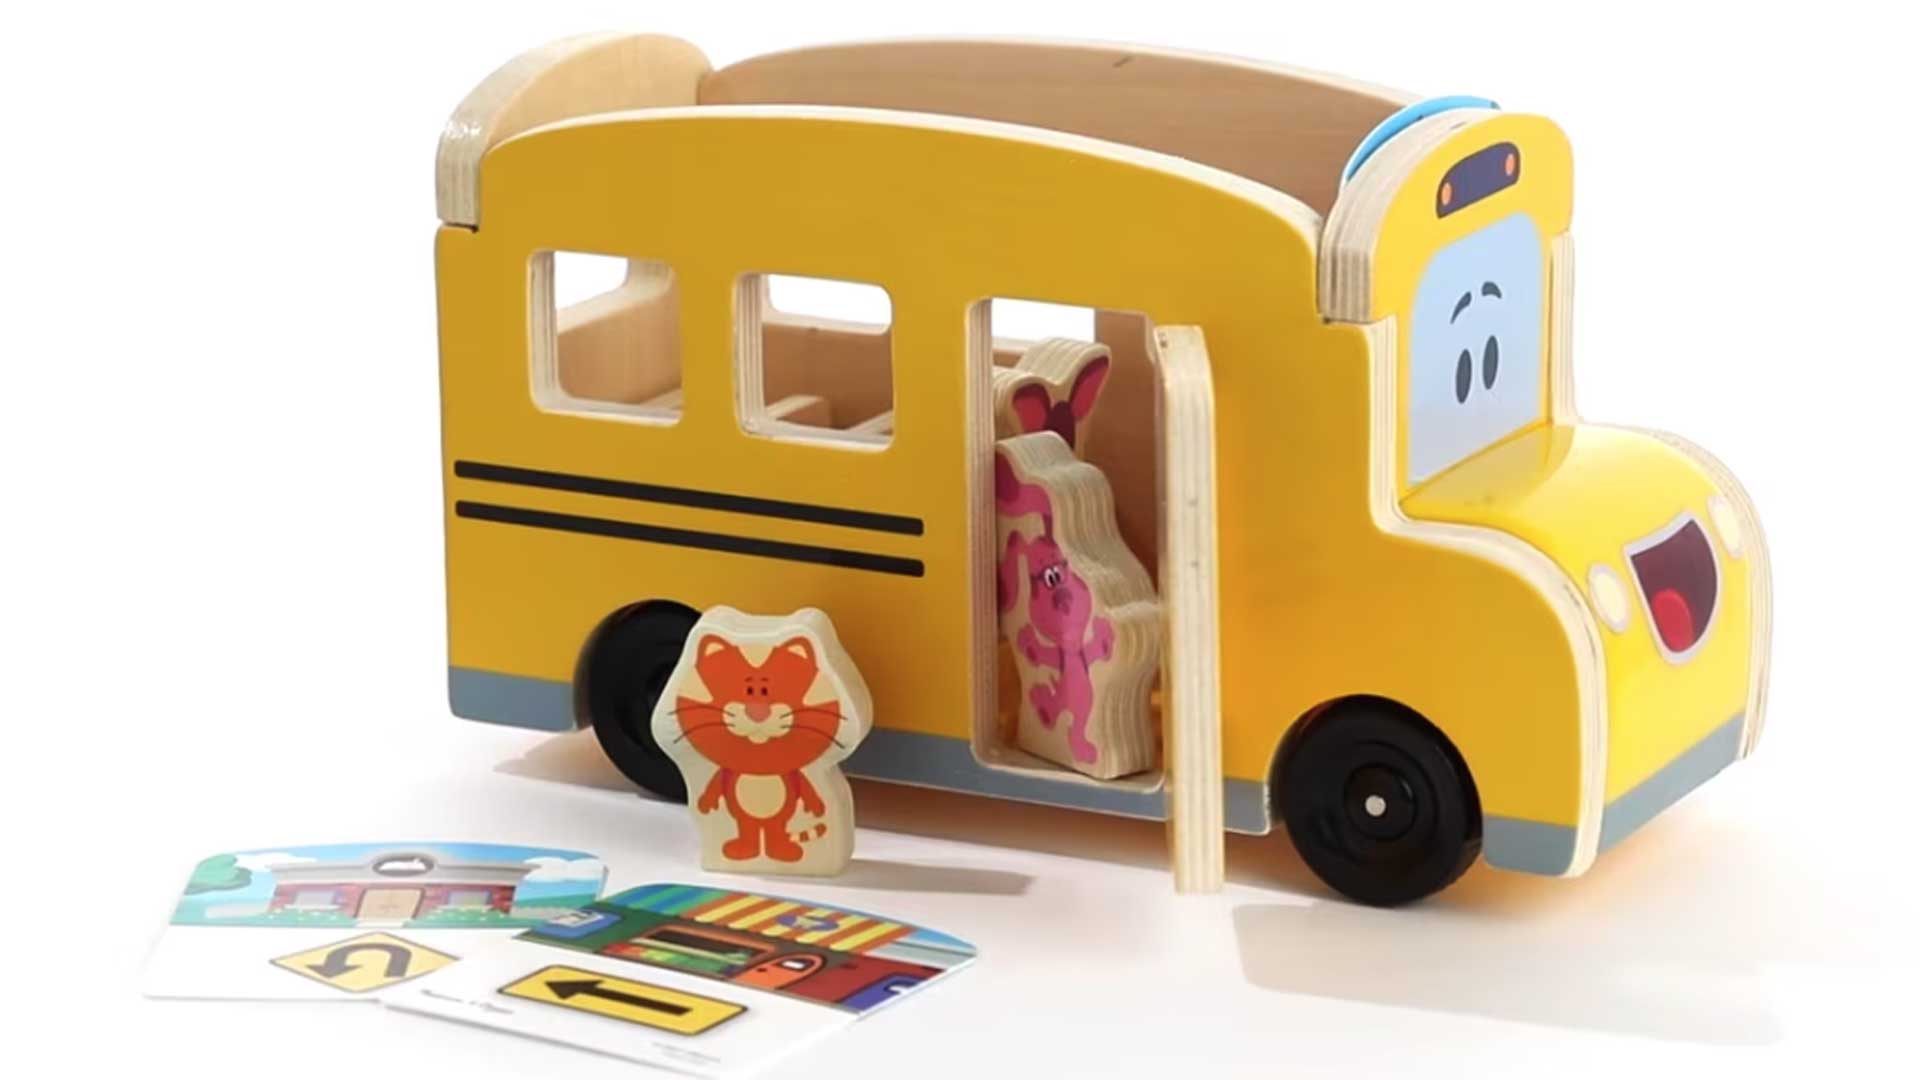 Commercial studio product photography and video production in Westchester, New York for Melissa & Doug Blues Clues bus